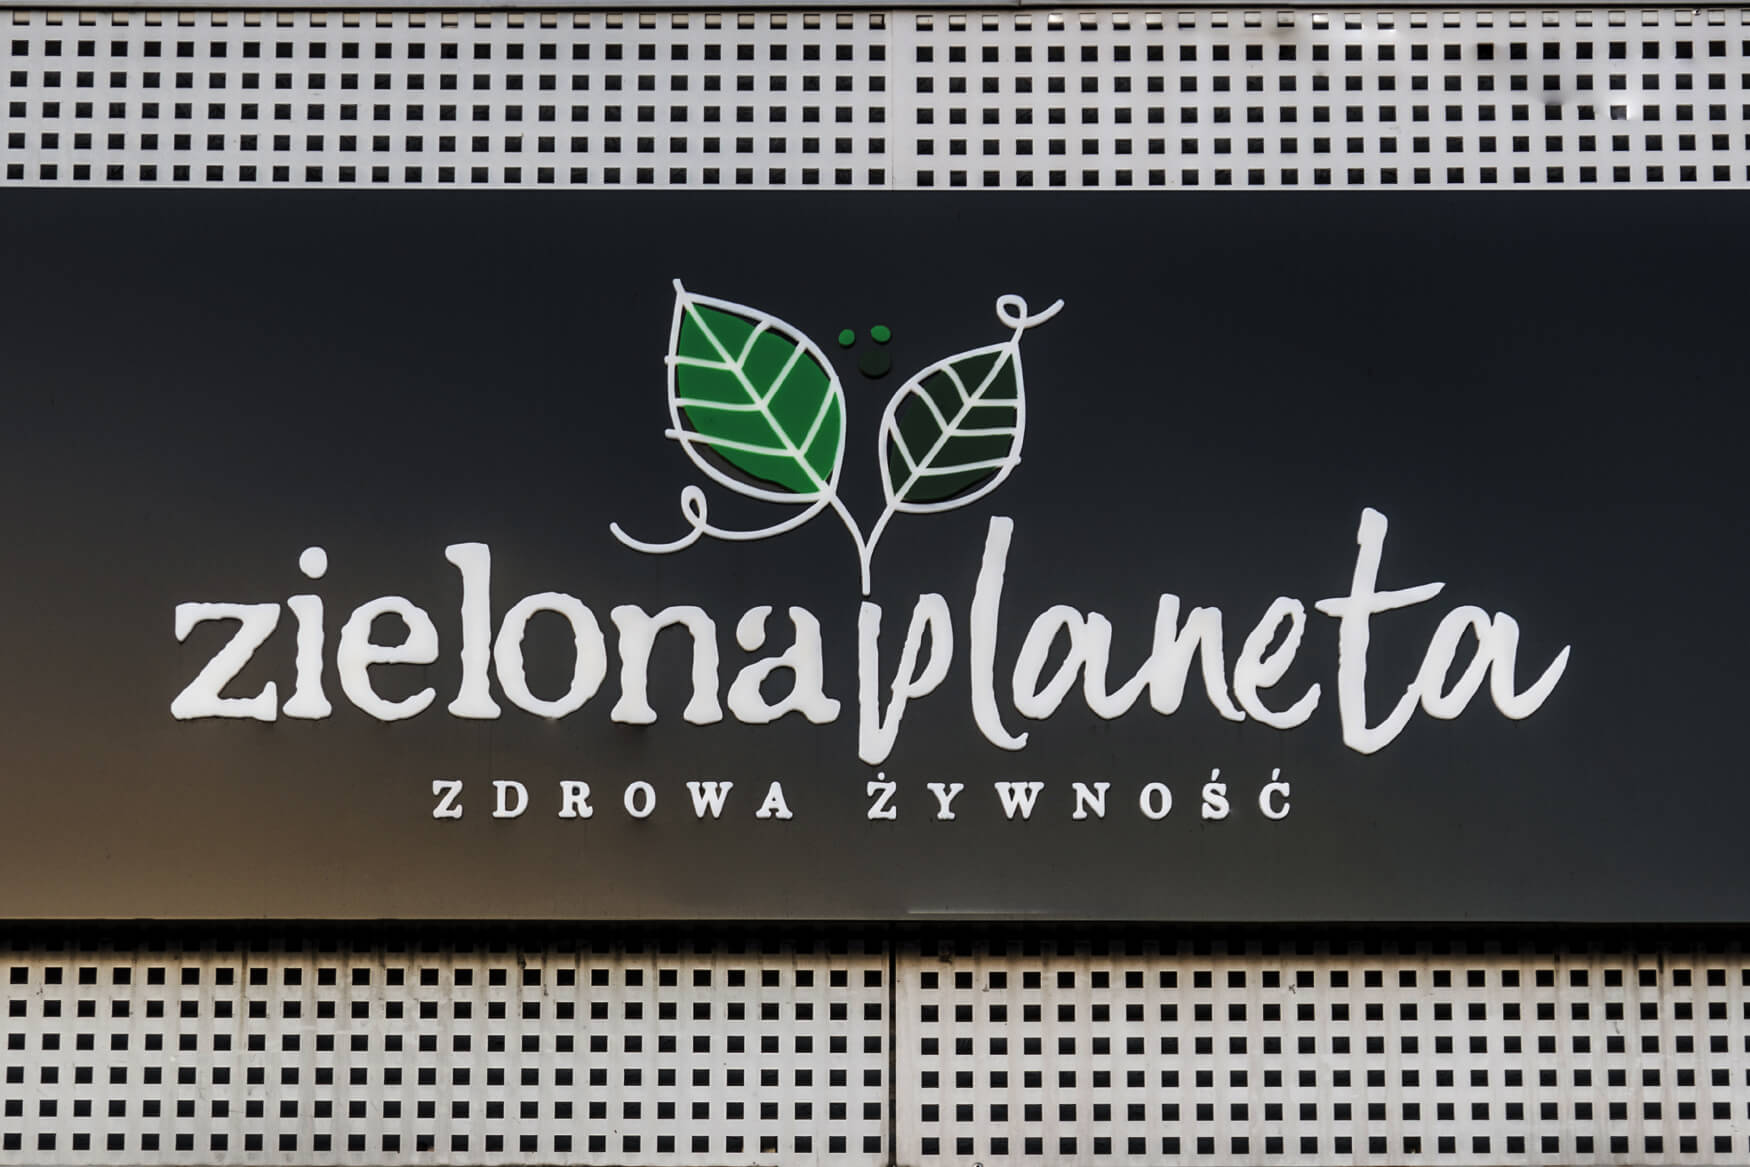 green planet - Zielona Planeta - illuminated advertising coffer with letters and spatial logo